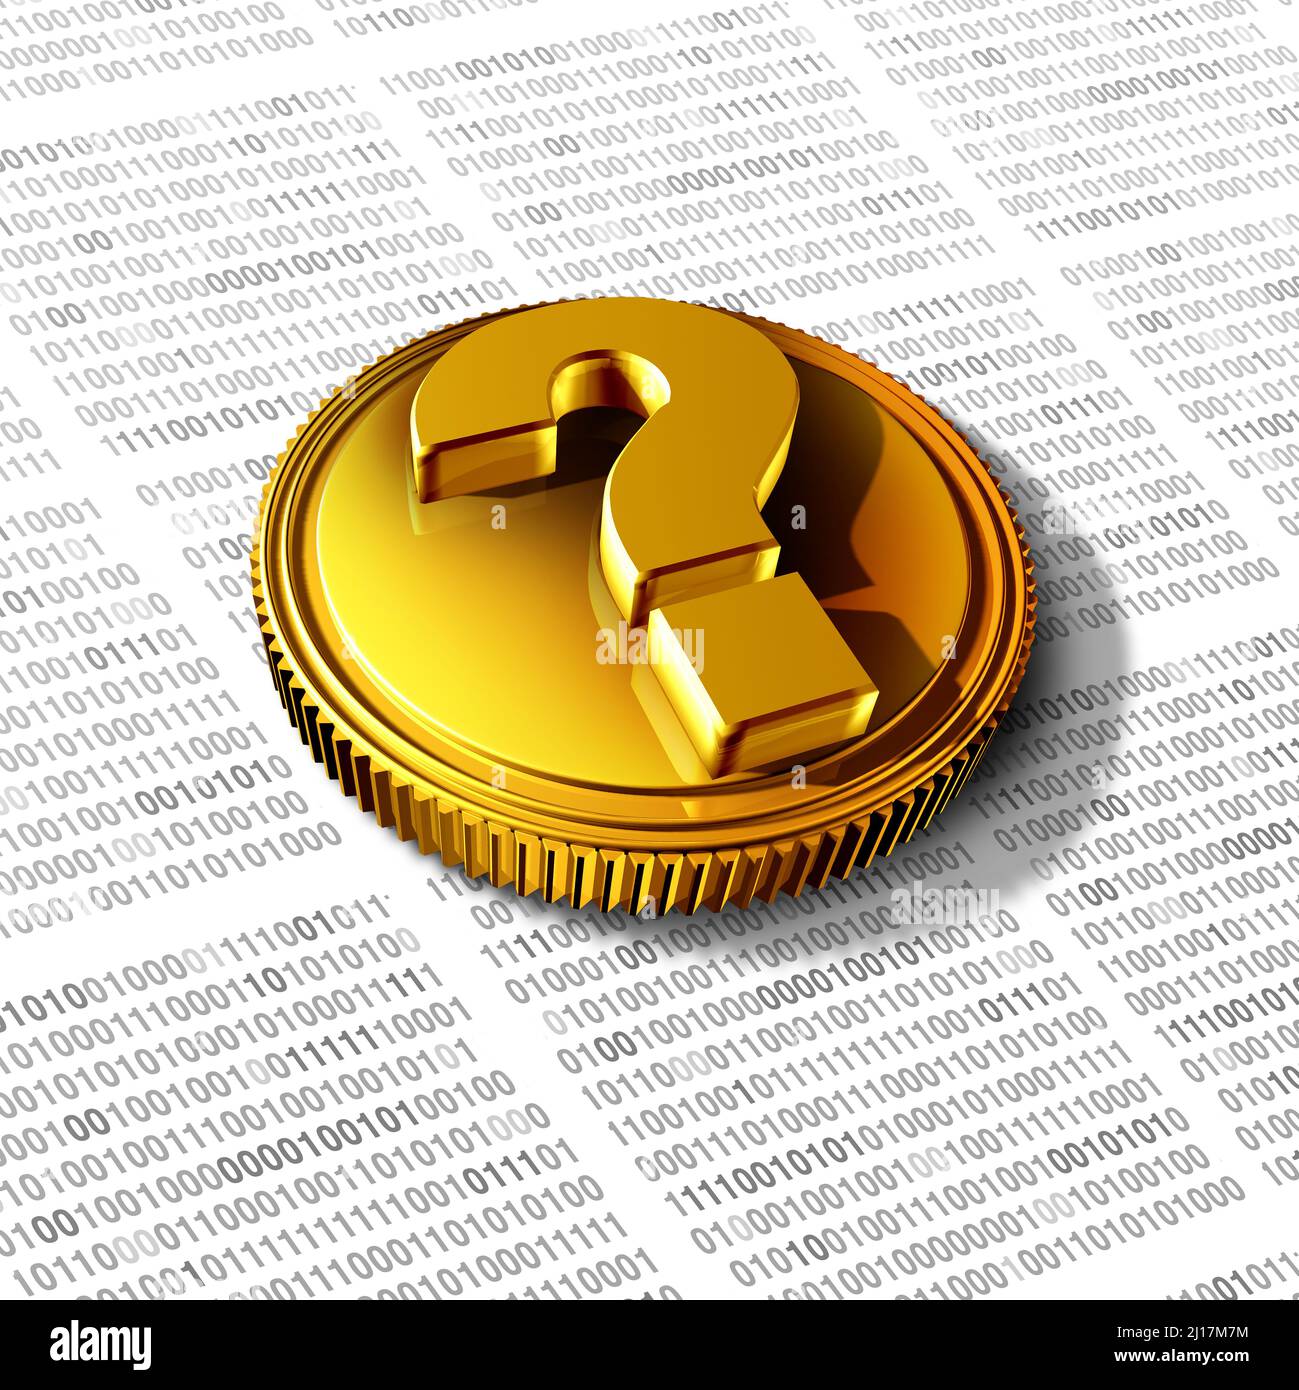 Cryptocurrency and Crypto currency questions and investing uncertainty as a virtual blockchain money investment risk with a golden coin. Stock Photo